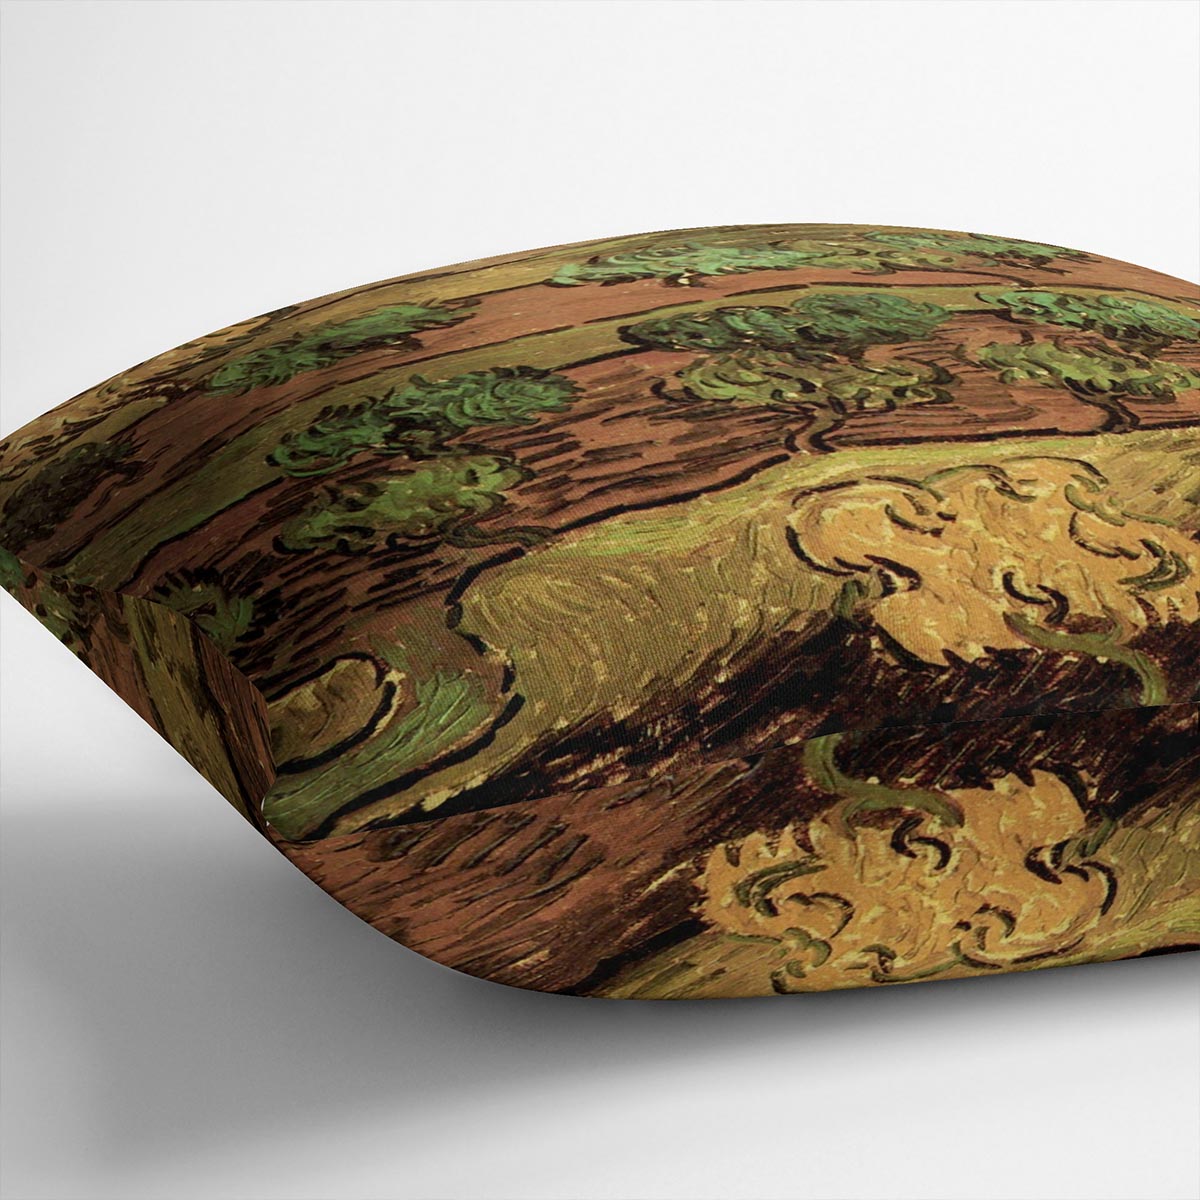 Olive Trees against a Slope of a Hill by Van Gogh Cushion